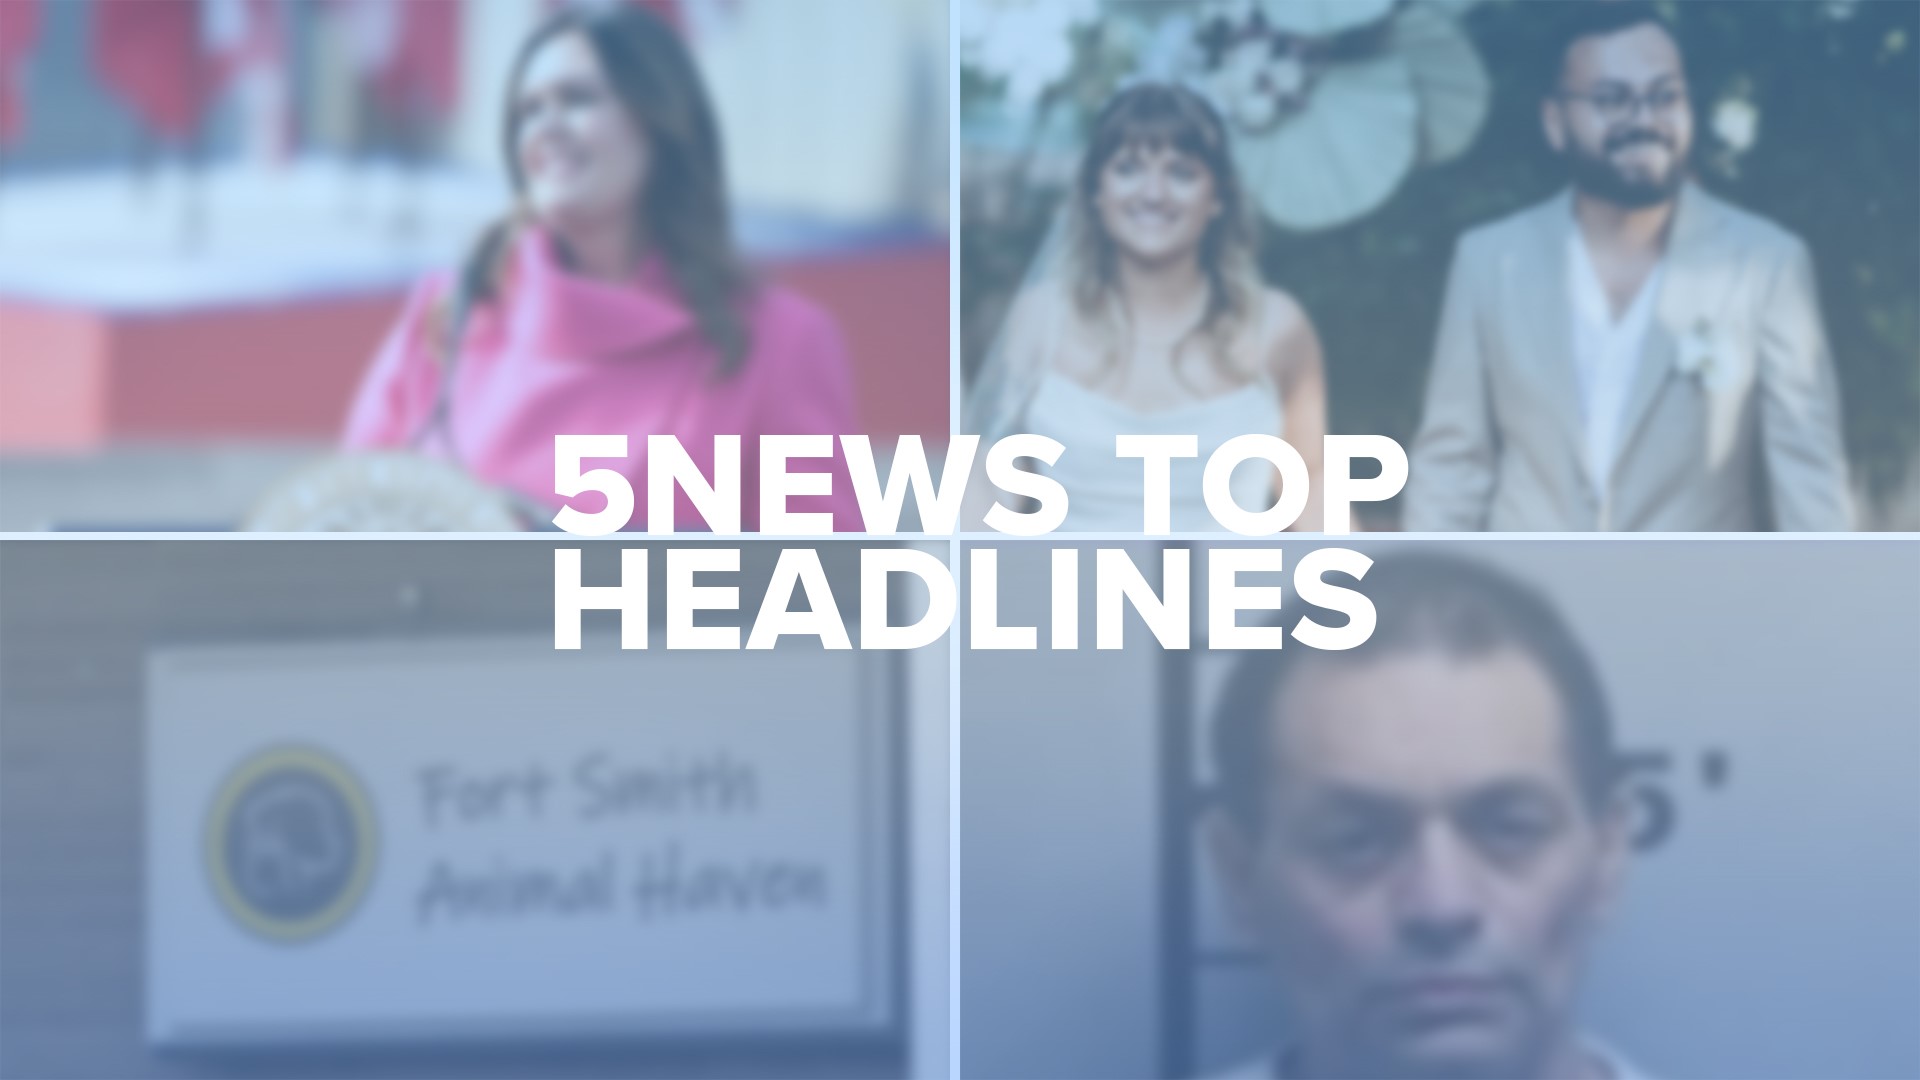 Take a look at the top headlines for local news this week across Northwest Arkansas and the River Valley! 📰